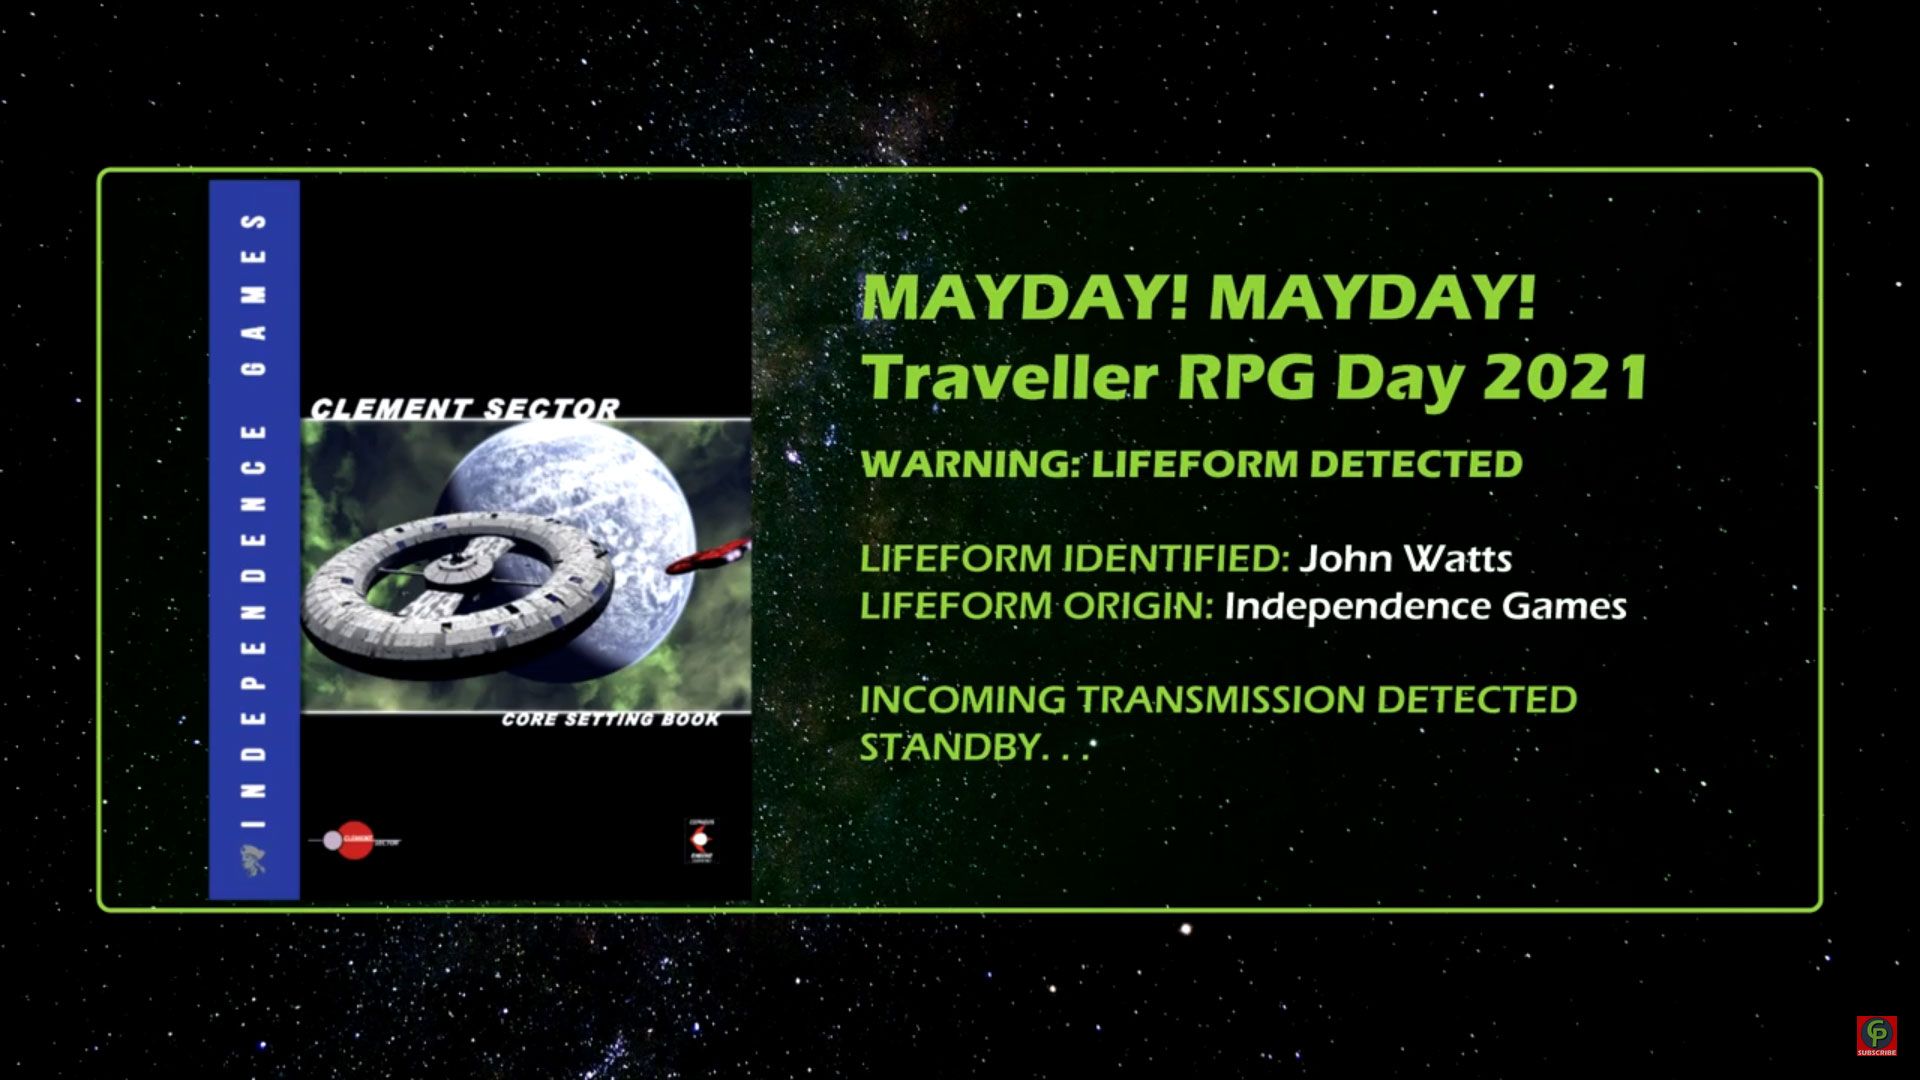 john watts of independence games Interview Traveller RPG Mayday 2021 title